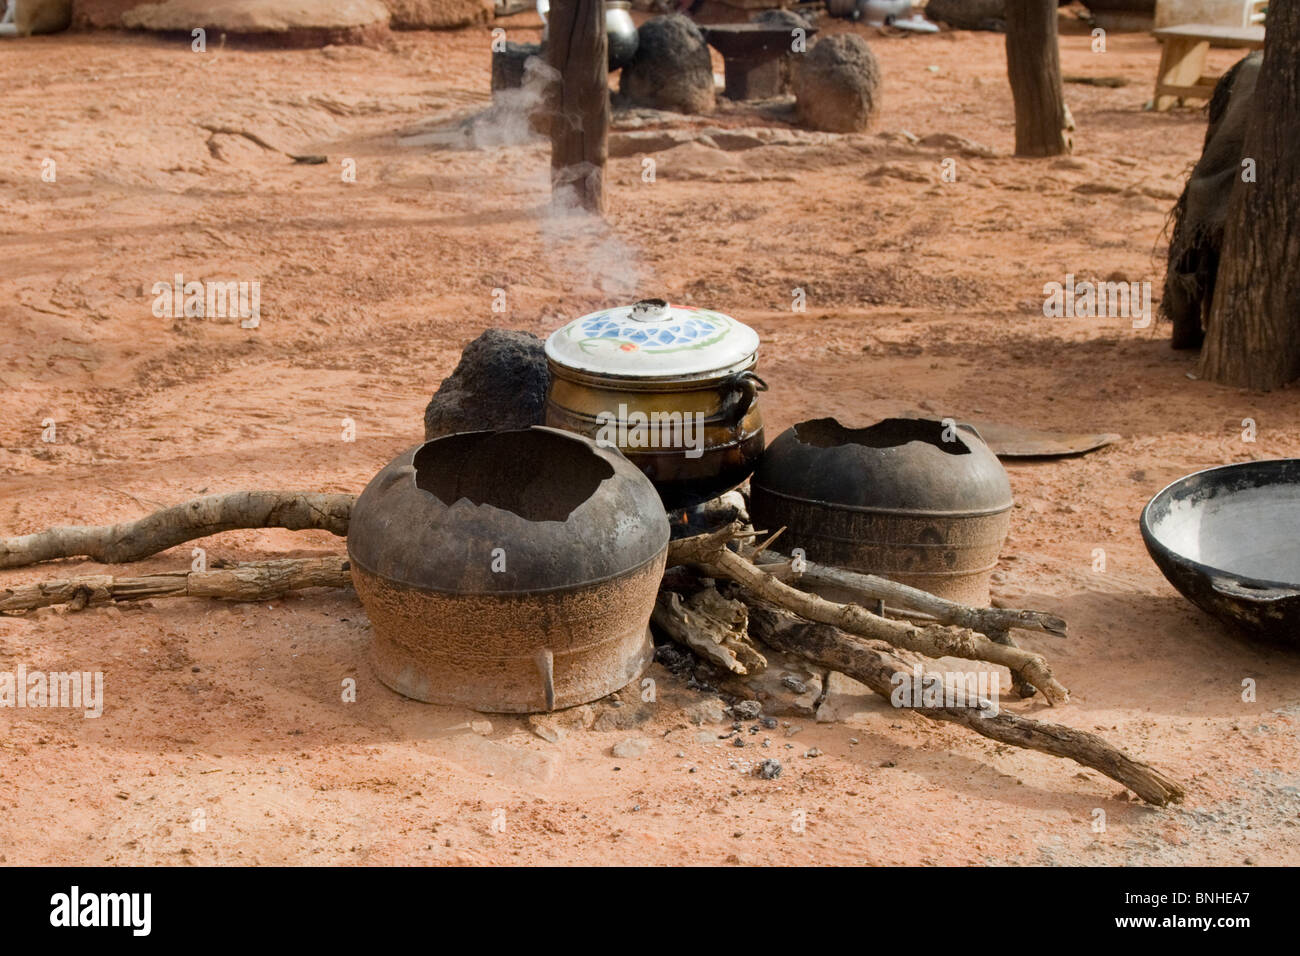 Cooking fire in the village of Bouchipe, Gonja triangle, Damango district, Ghana. Stock Photo